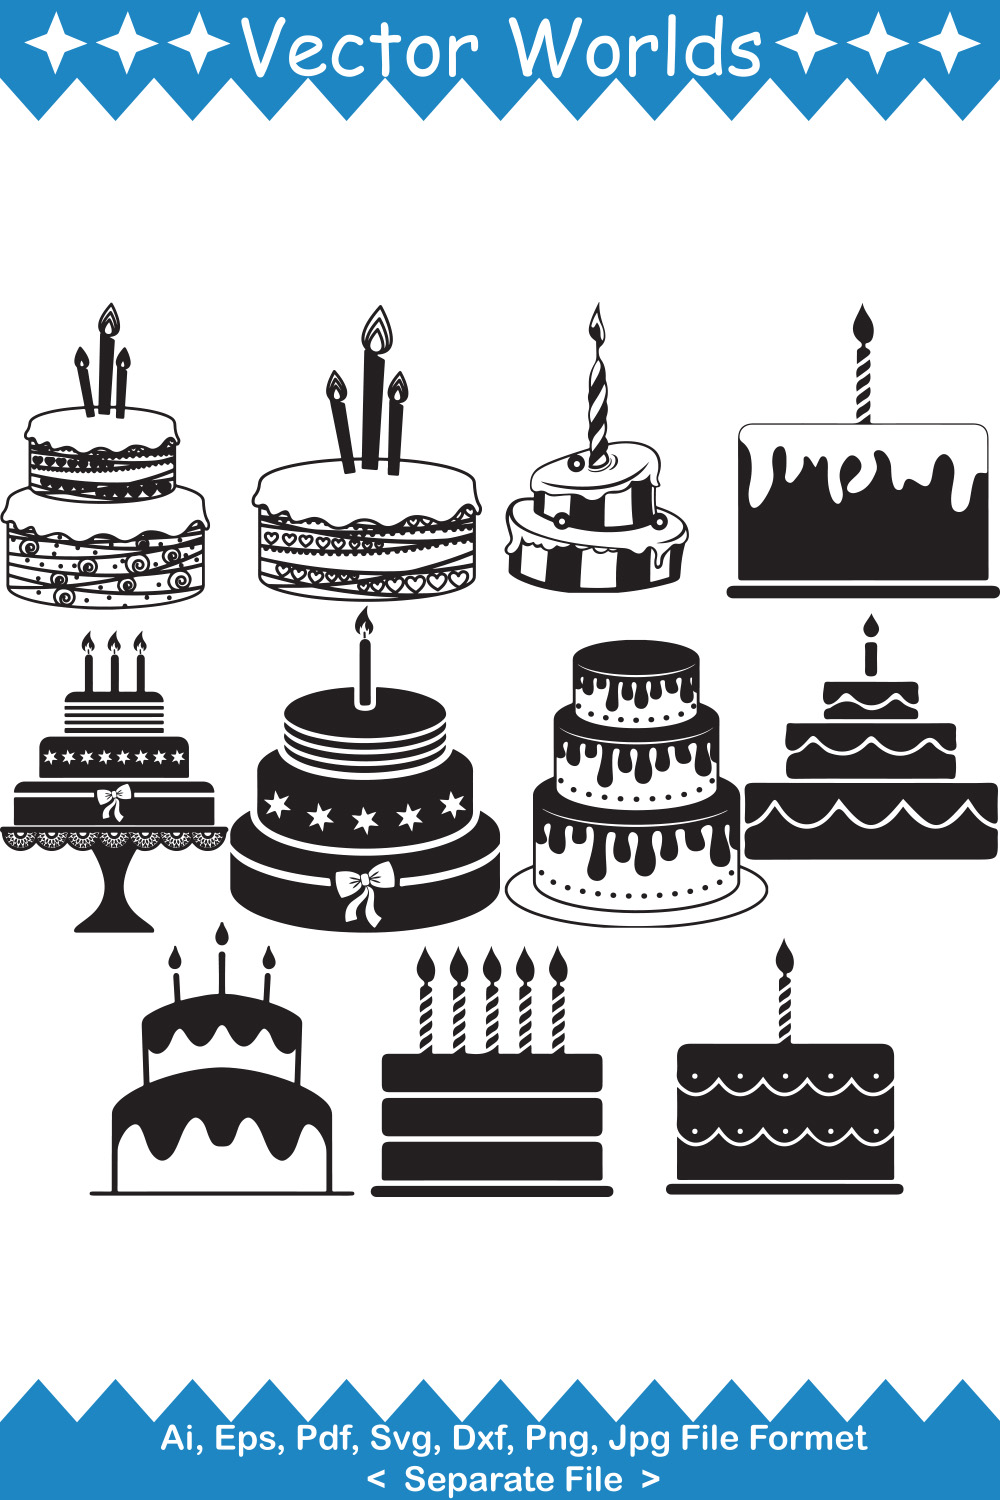 A selection of unique images of silhouettes of birthday cakes